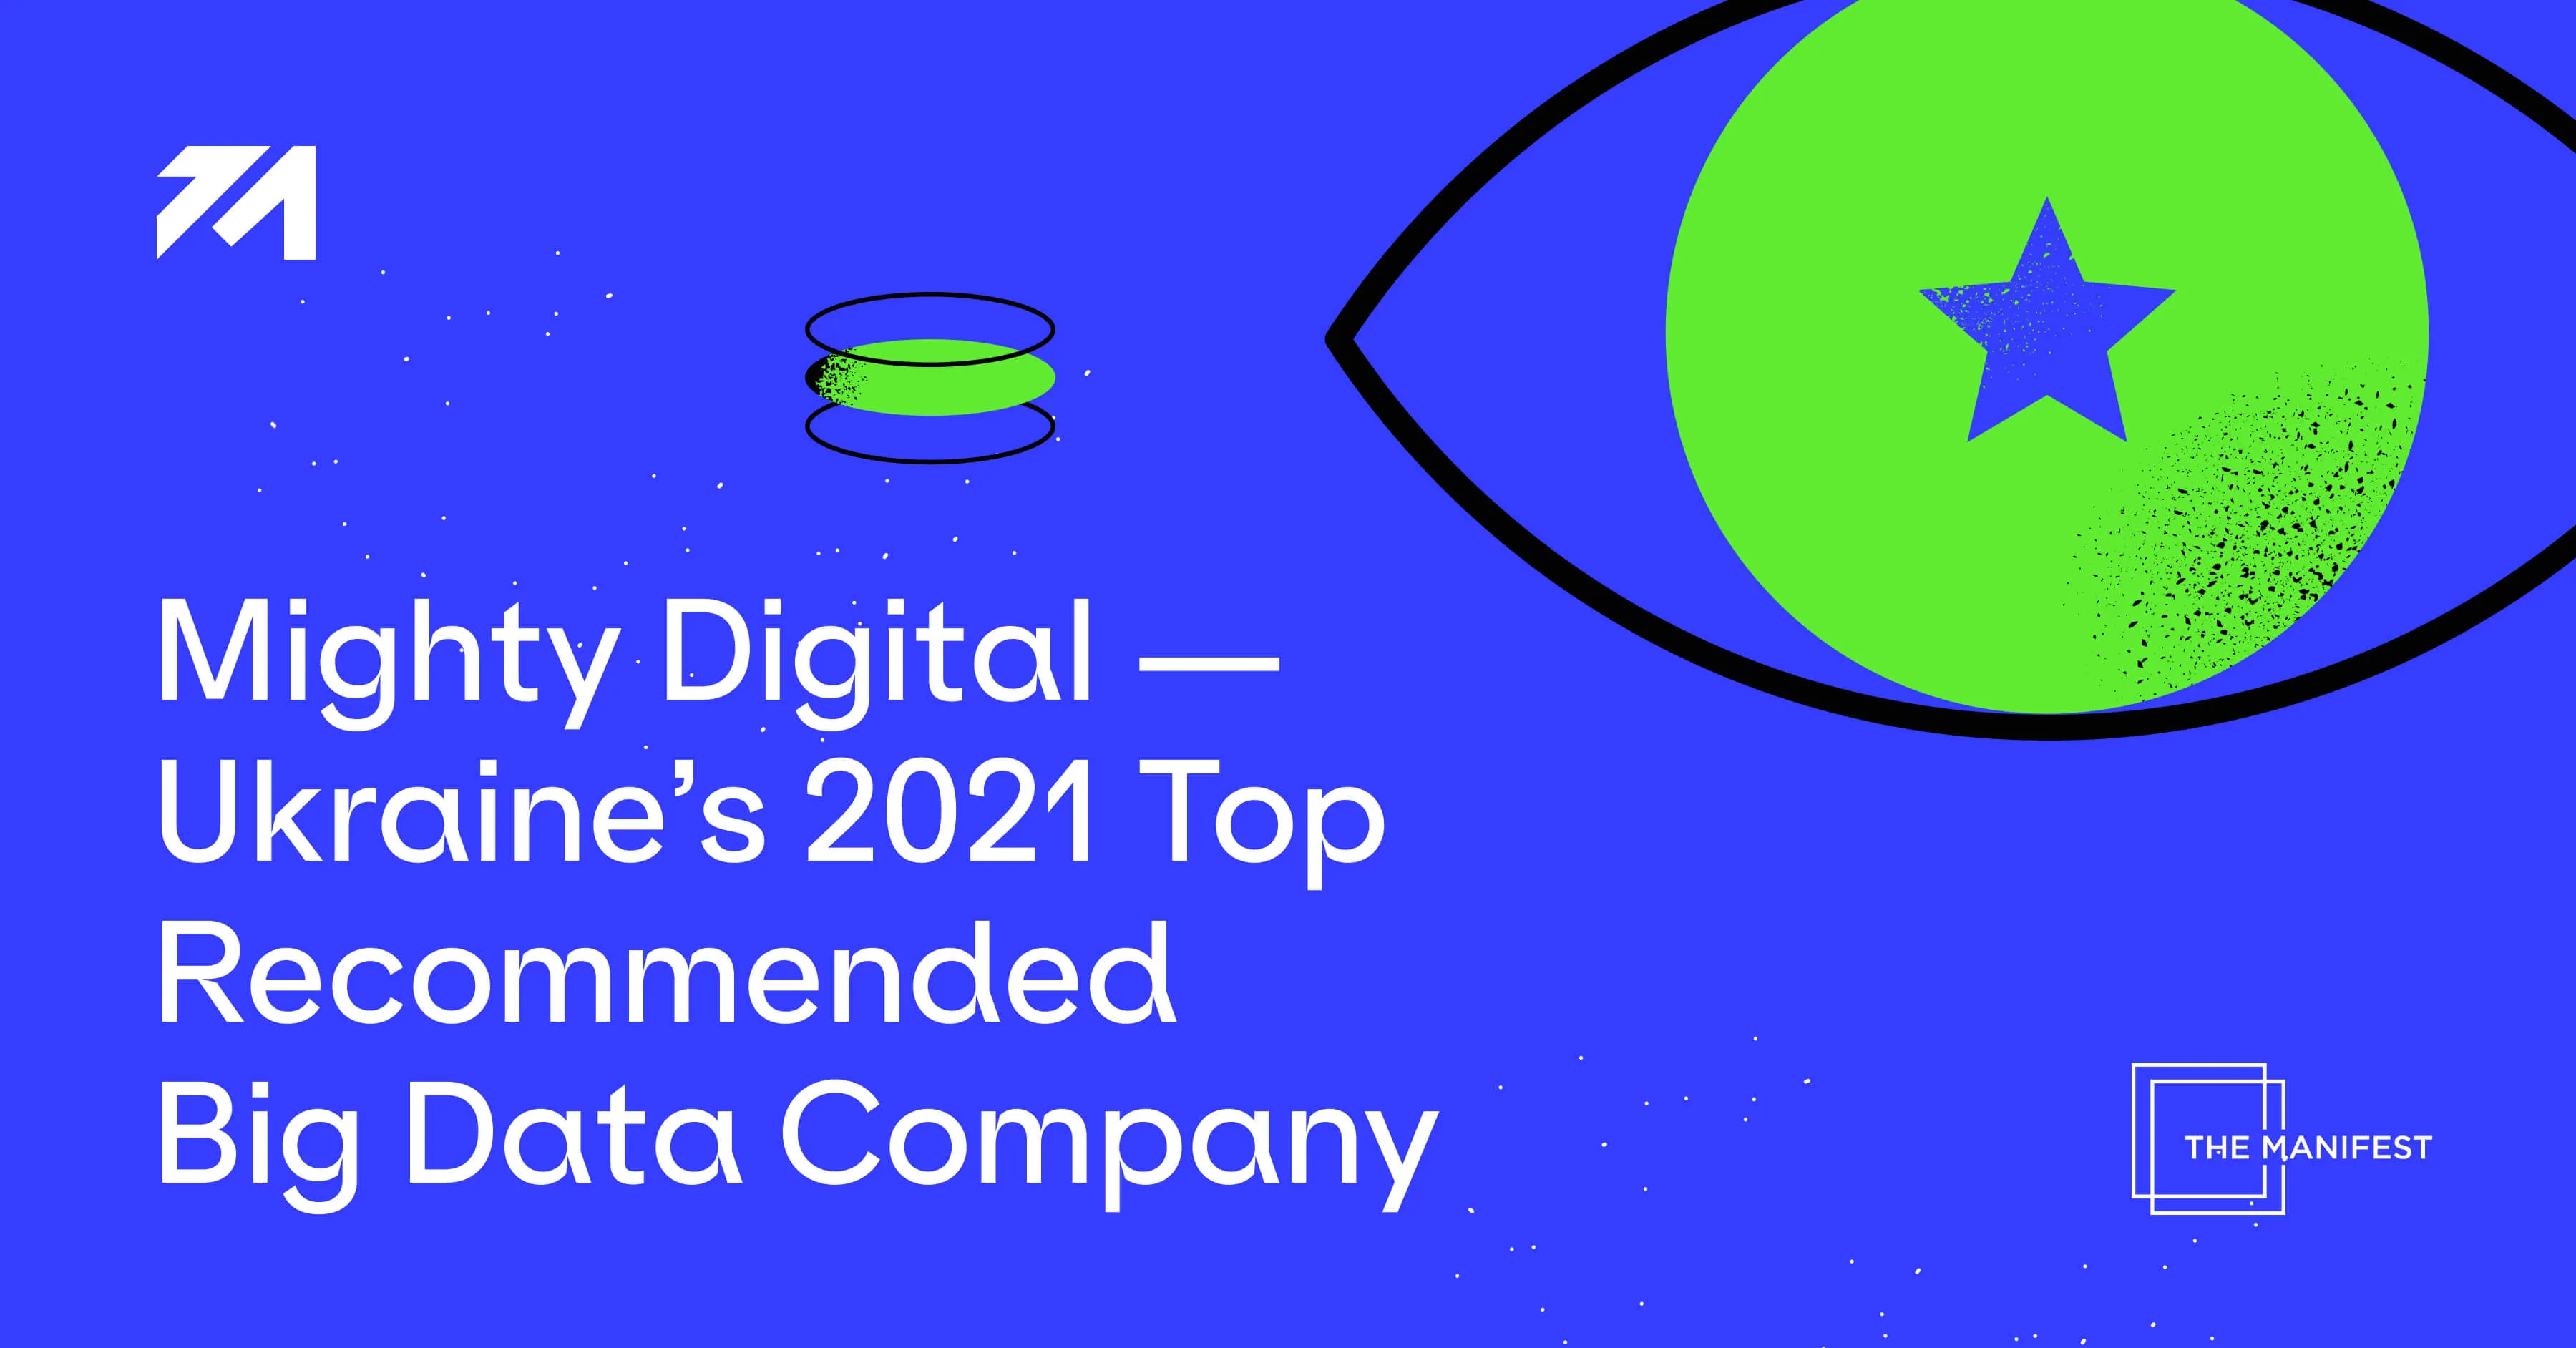 The Manifest Names Mighty Digital as Ukraine's 2021 Top Recommended Big Data Company